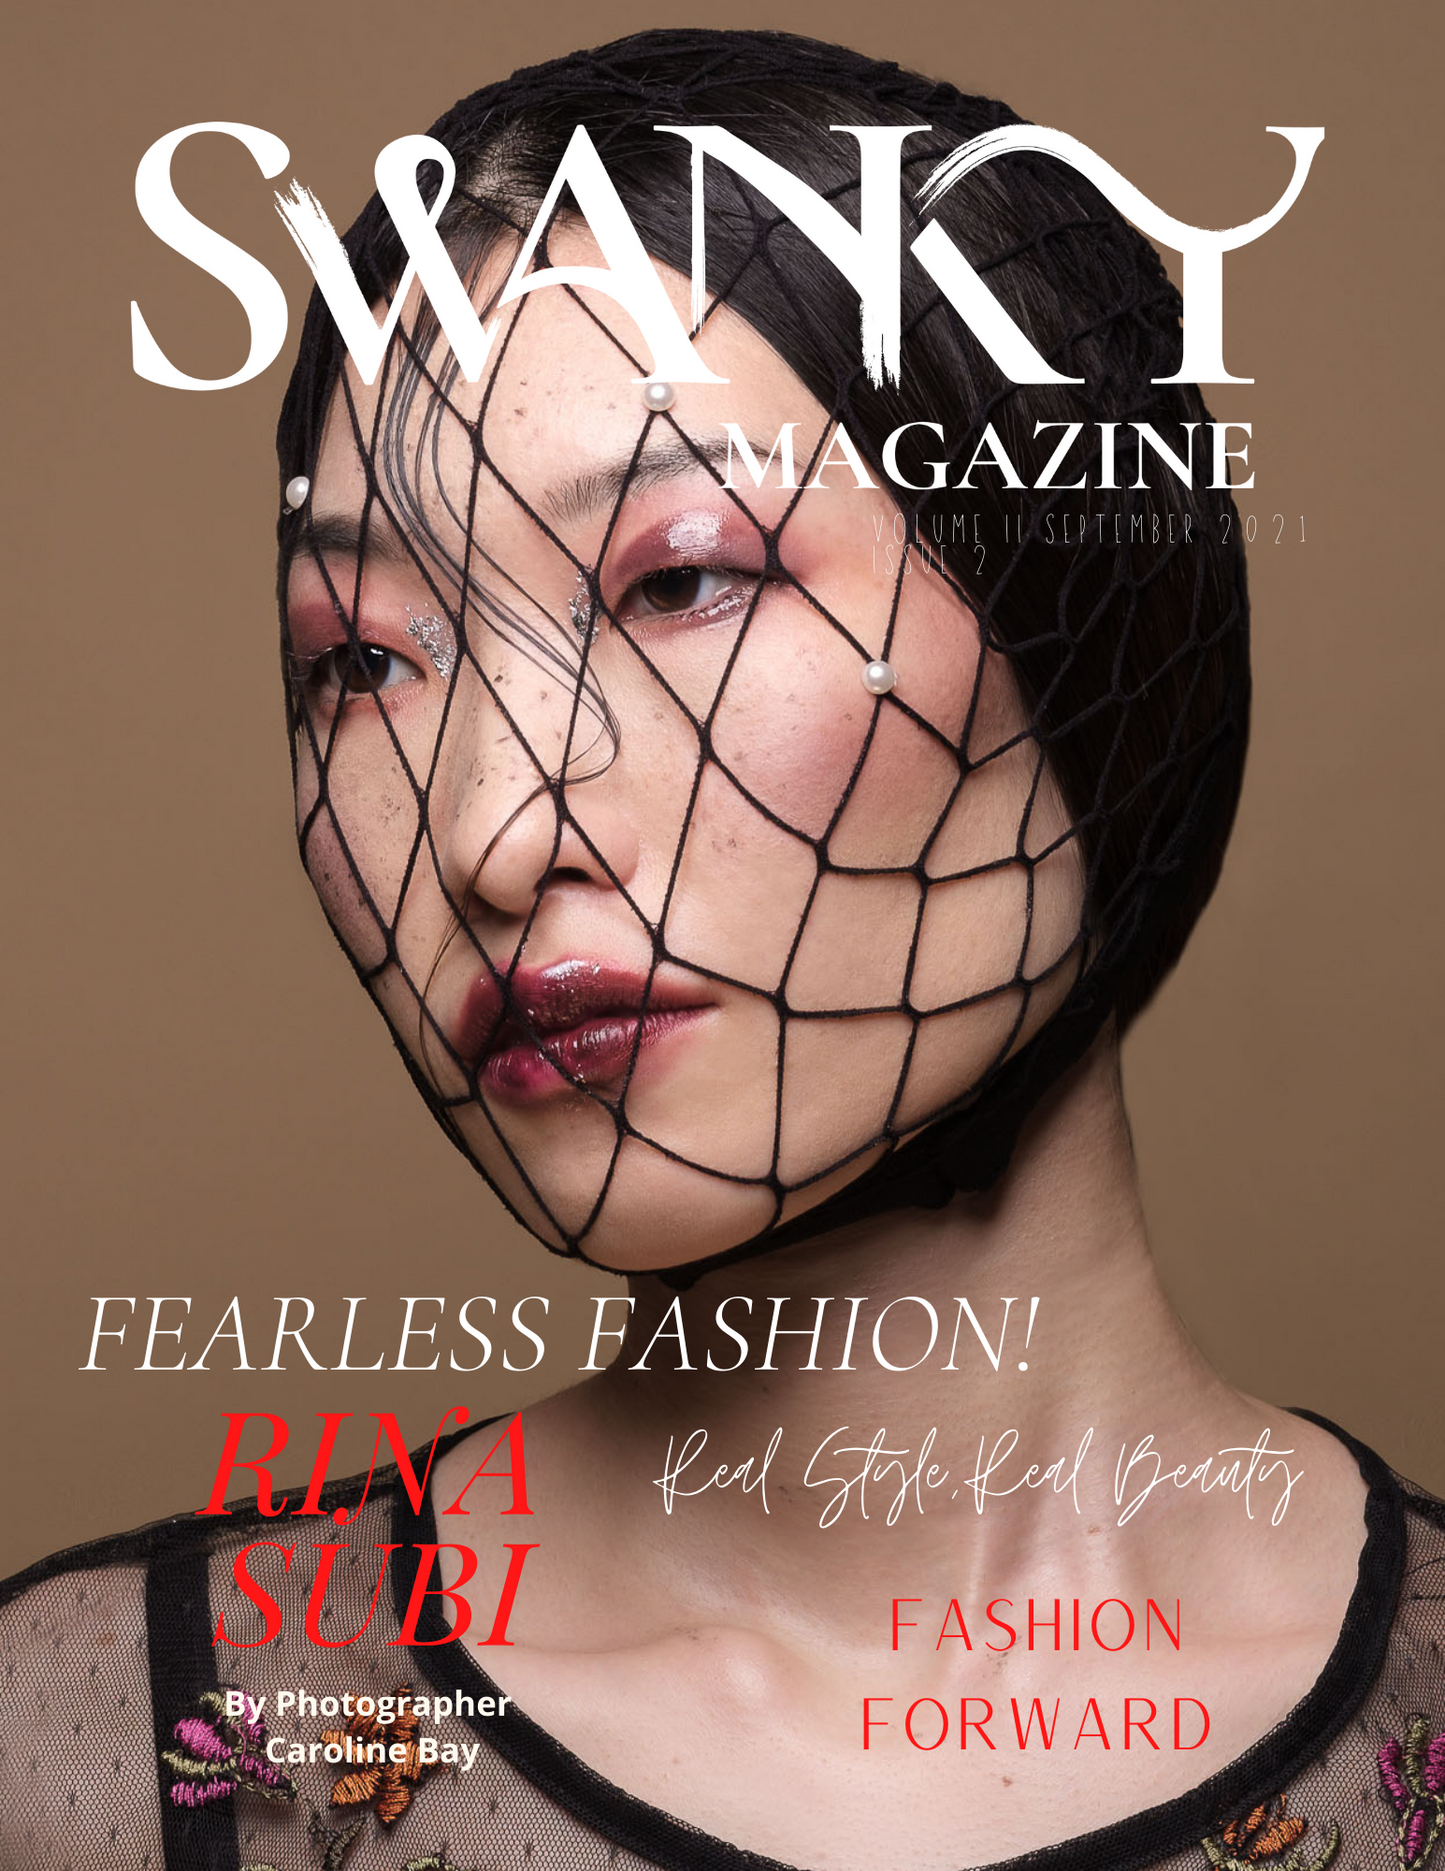 Beauty Is You Edition VOL II Issue 2